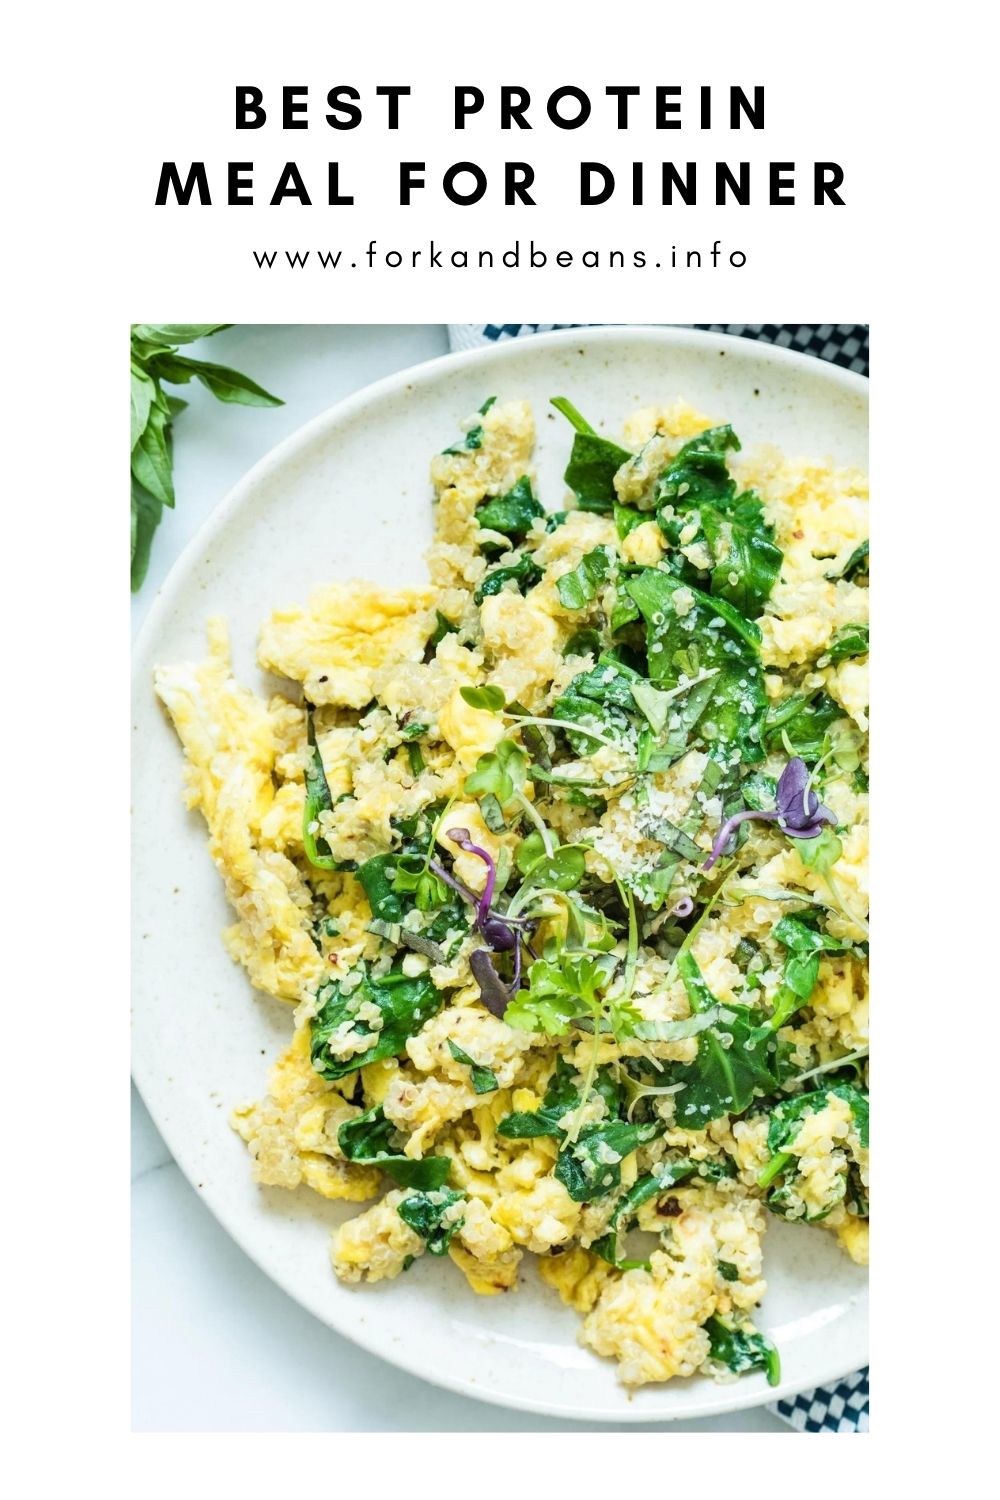 Mushroom and Spinach Scramble with Goat Cheese